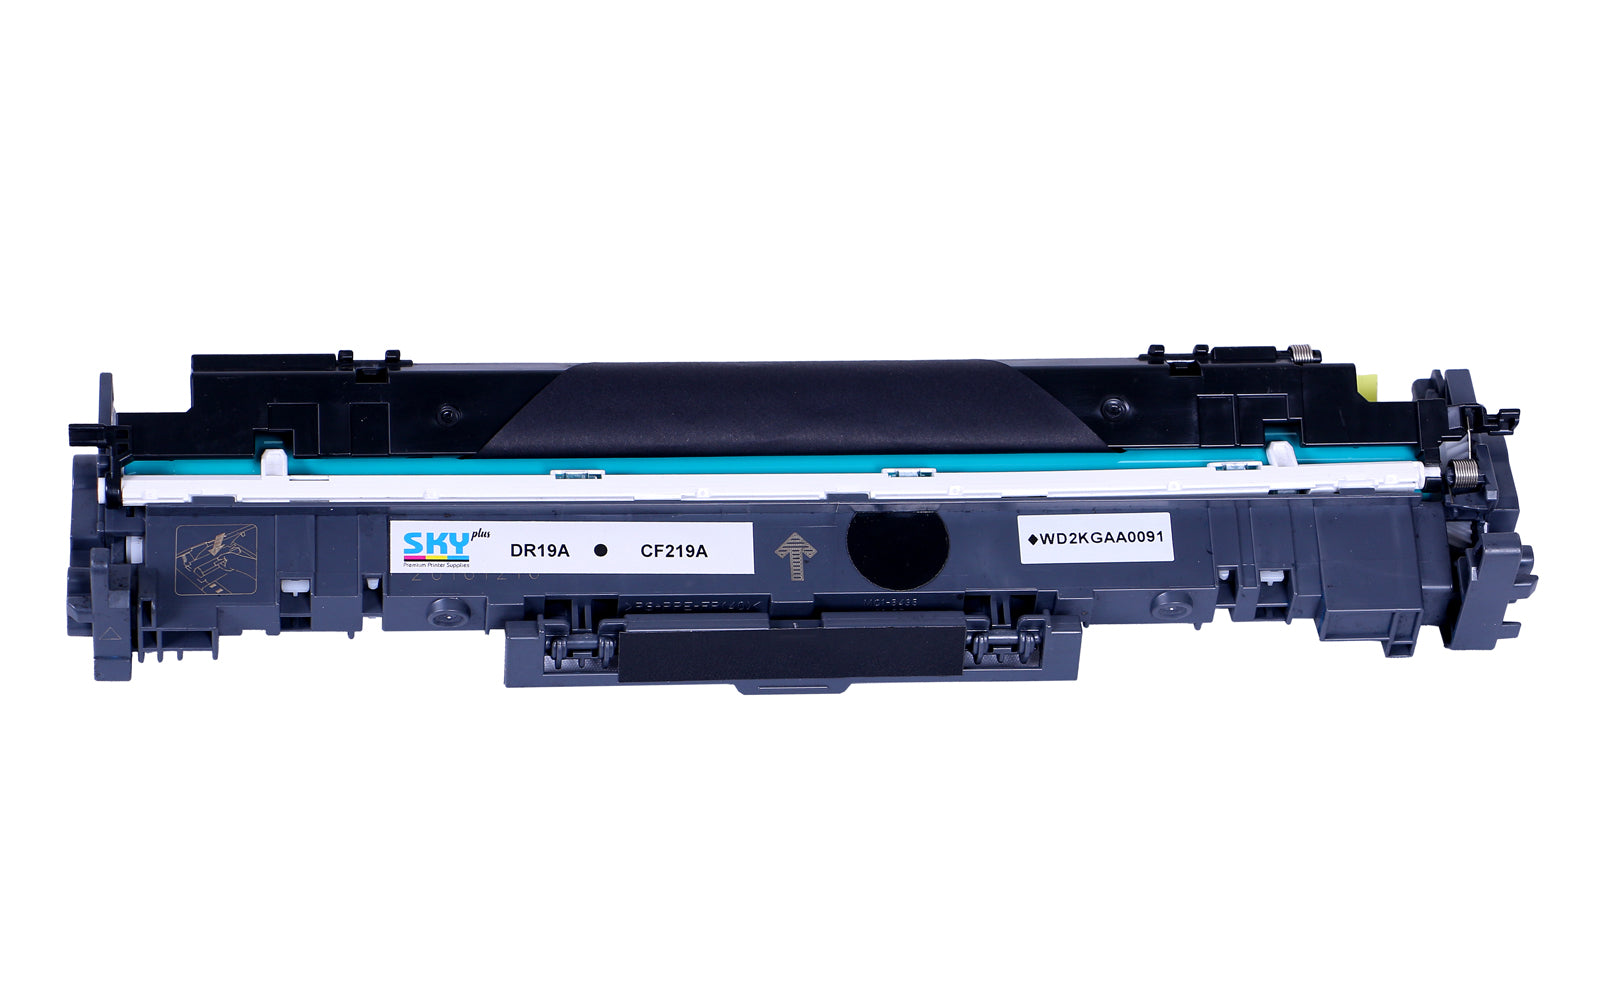 Sky Plus 19A  Remanufactured Drum Unit  for HP Laserjet M102 and MFP M130